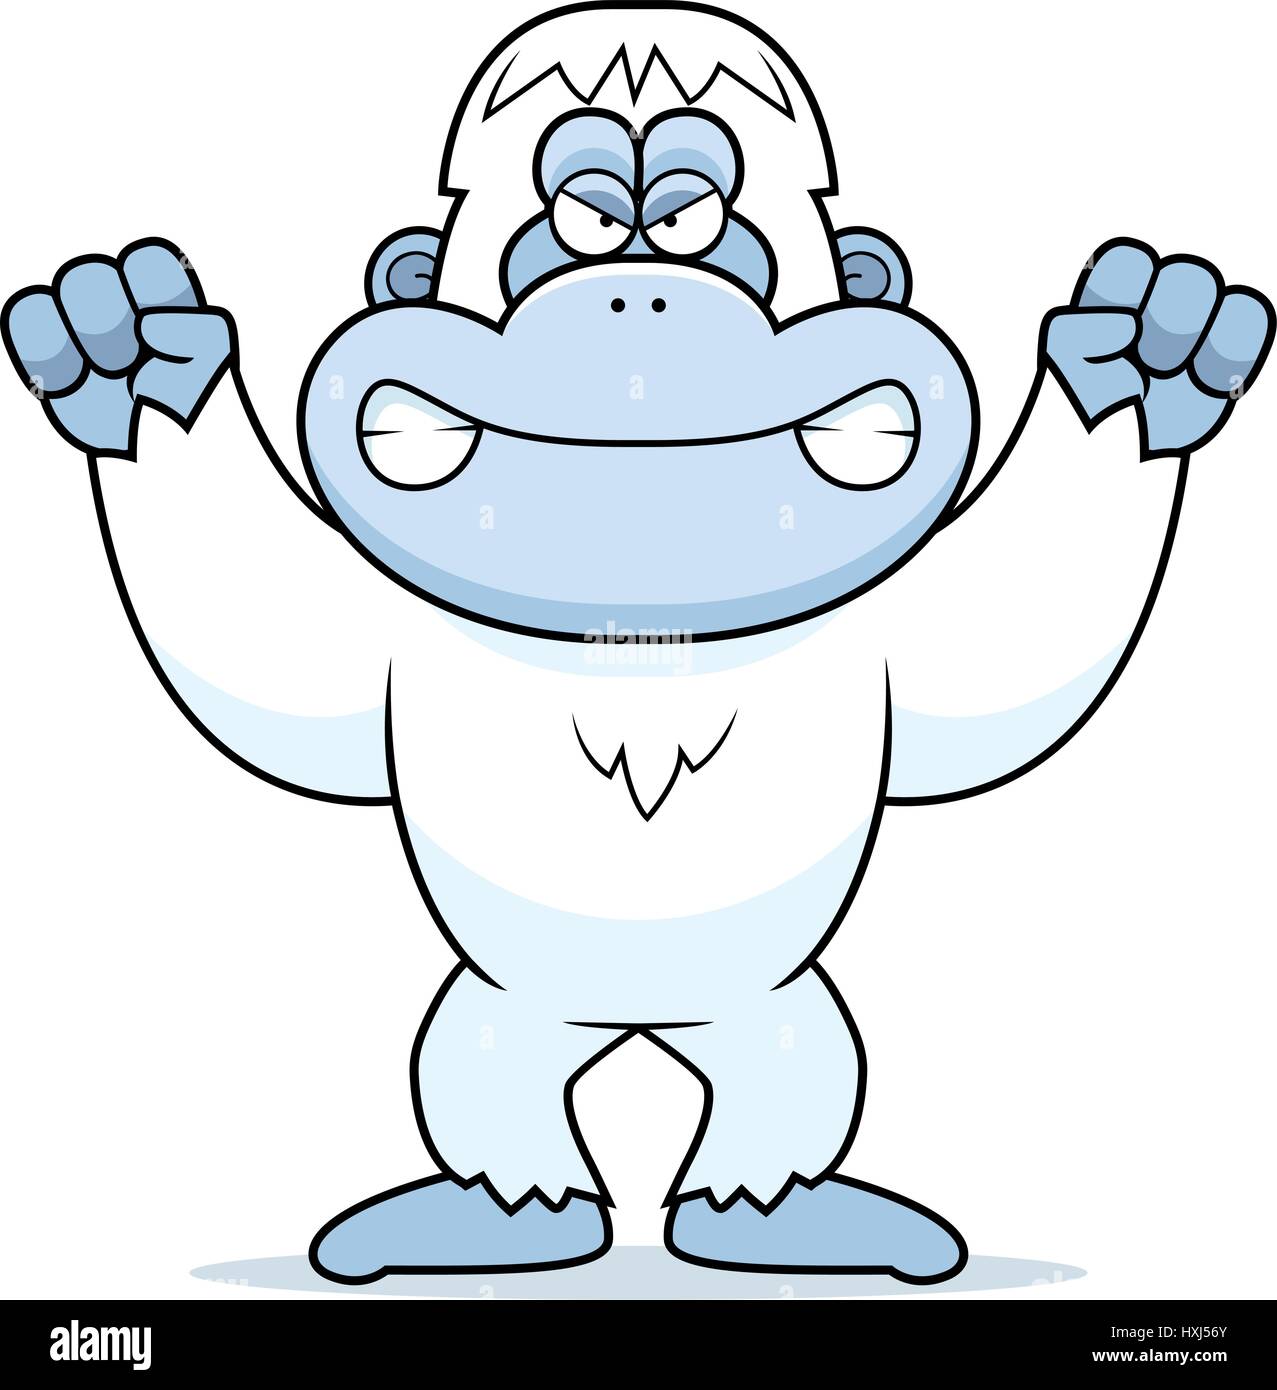 A cartoon illustration of an angry looking yeti. Stock Vector